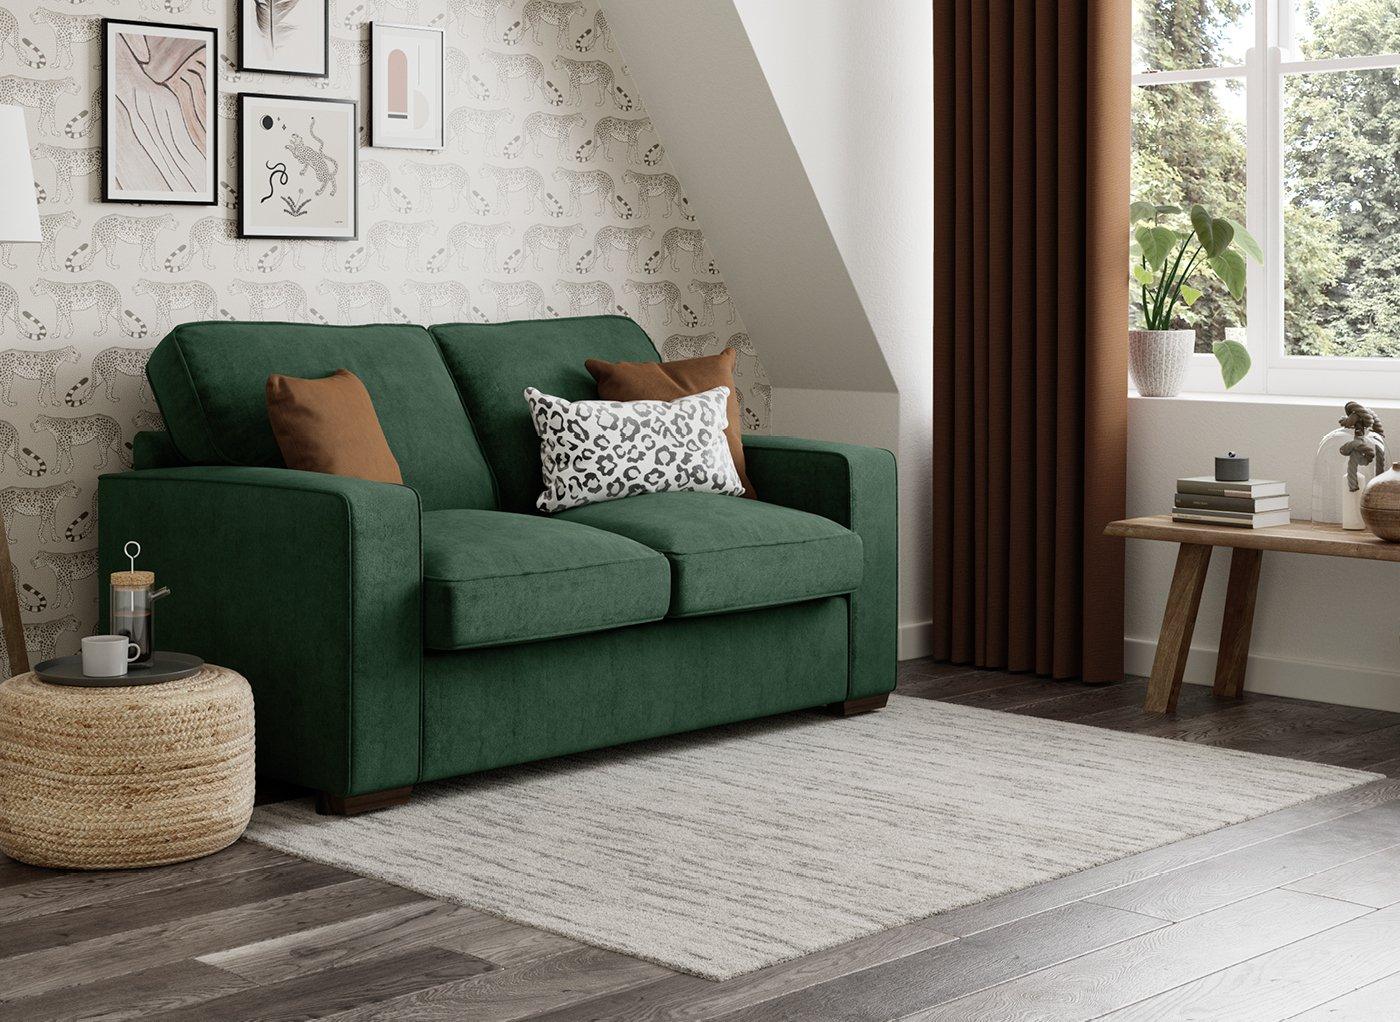 Odessa 3 Seater Sofa Bed Deluxe - Emerald Green 3 Seater